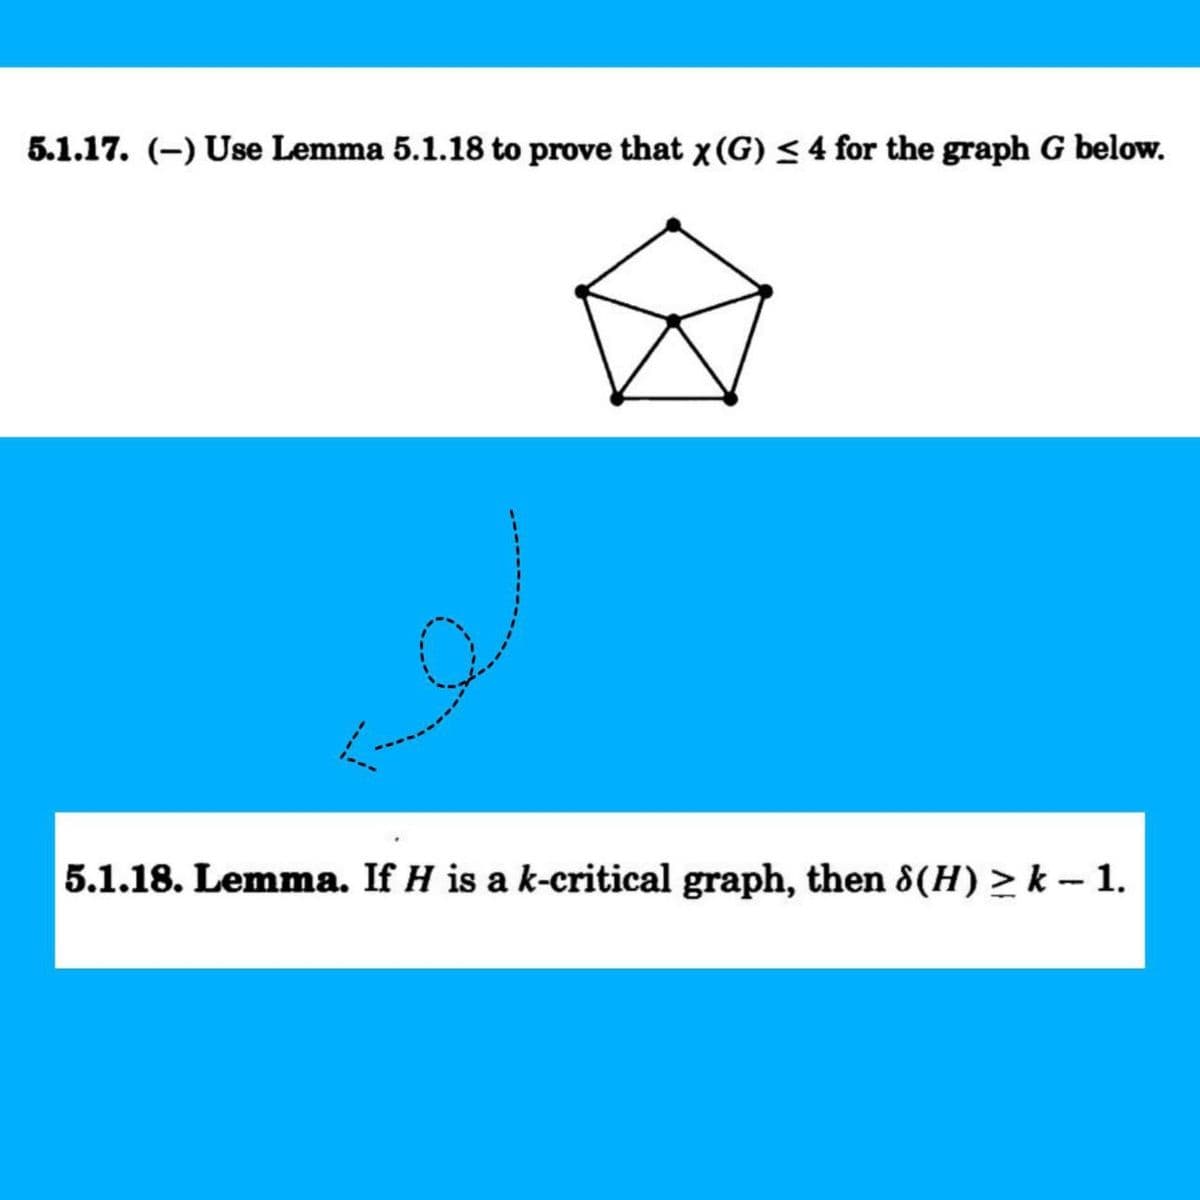 5.1.17. (-) Use Lemma 5.1.18 to prove that x (G) ≤ 4 for the graph G below.
5.1.18. Lemma. If H is a k-critical graph, then 8(H) >k - 1.